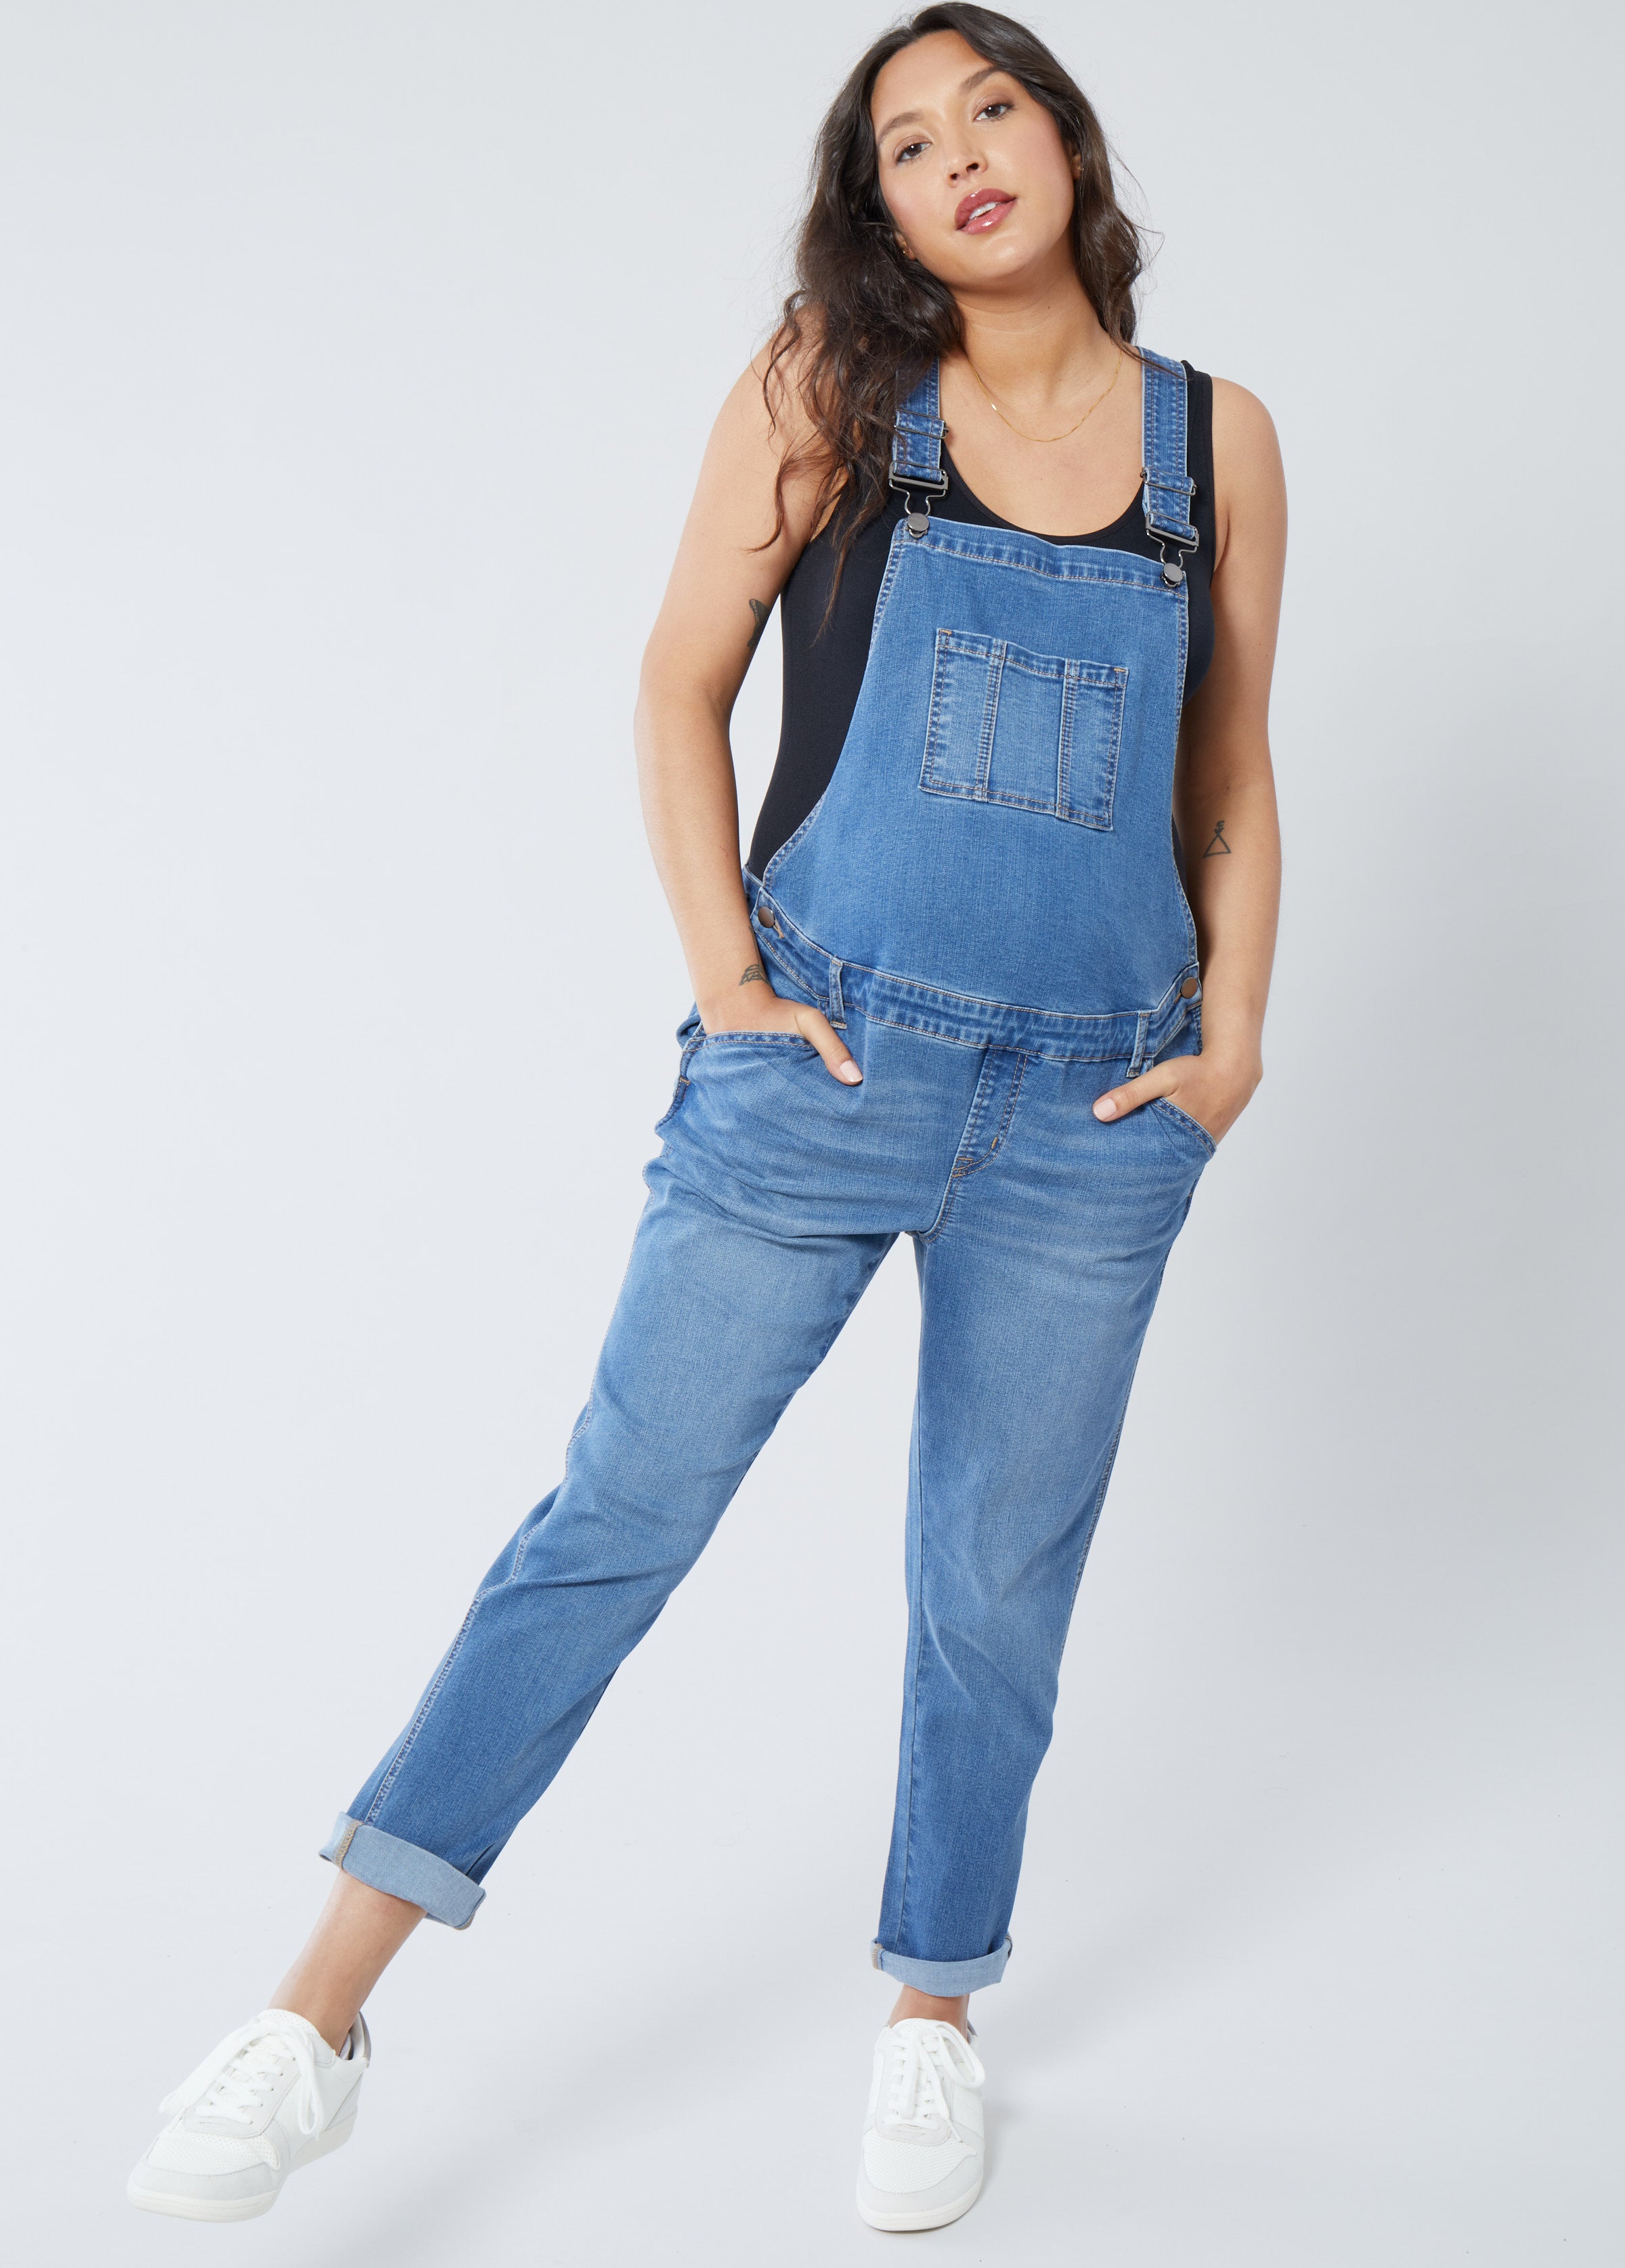 10 Maternity Overalls That You'll Love - FamilyEducation